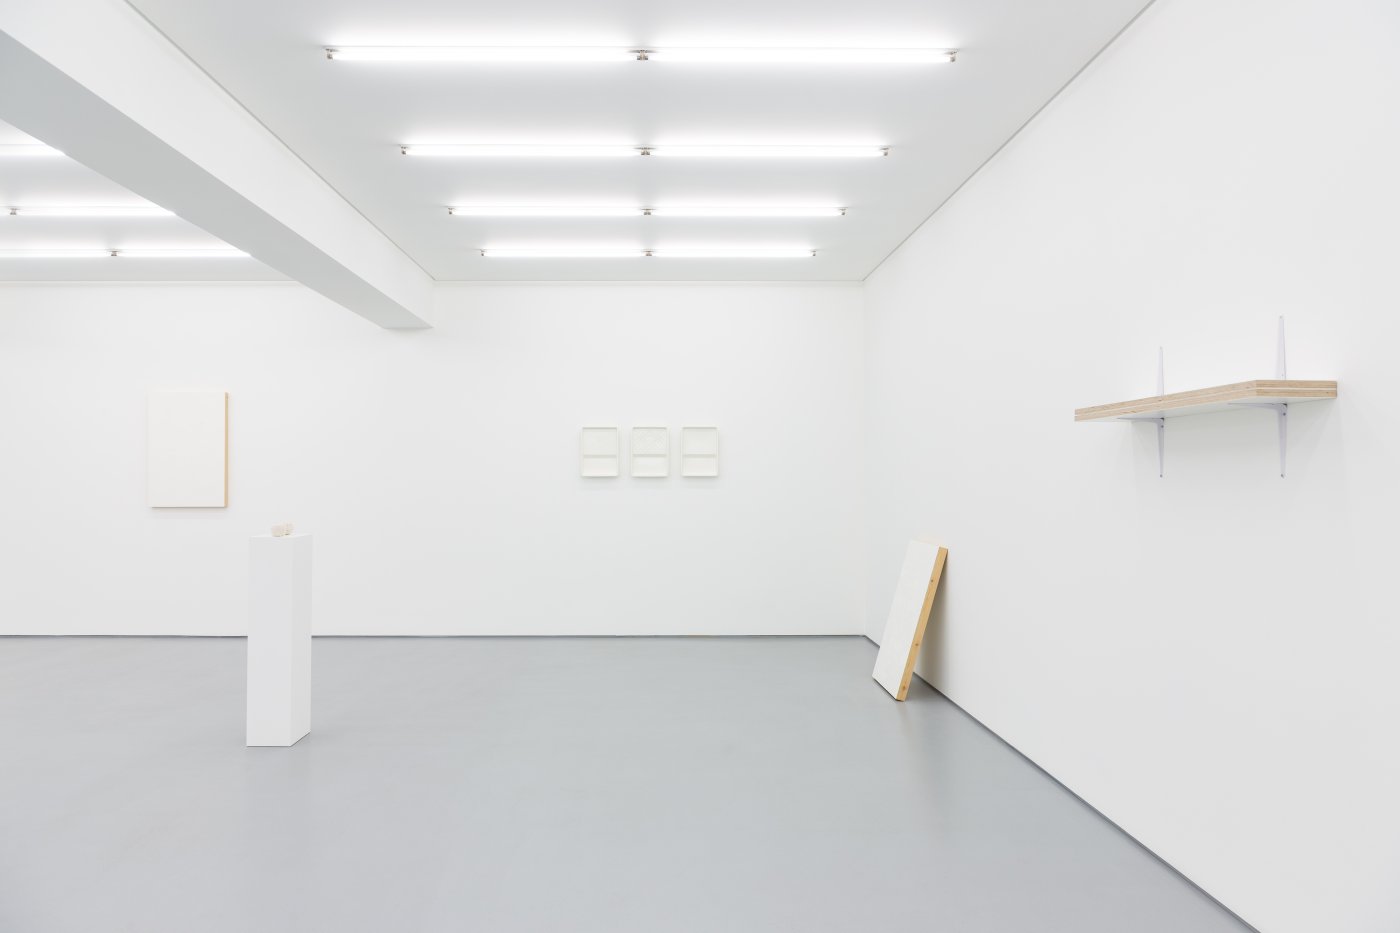 Exhibition view: Everything is Black and White, John Wood and Paul Harrison, Galeria Vera Cortês, 2021
